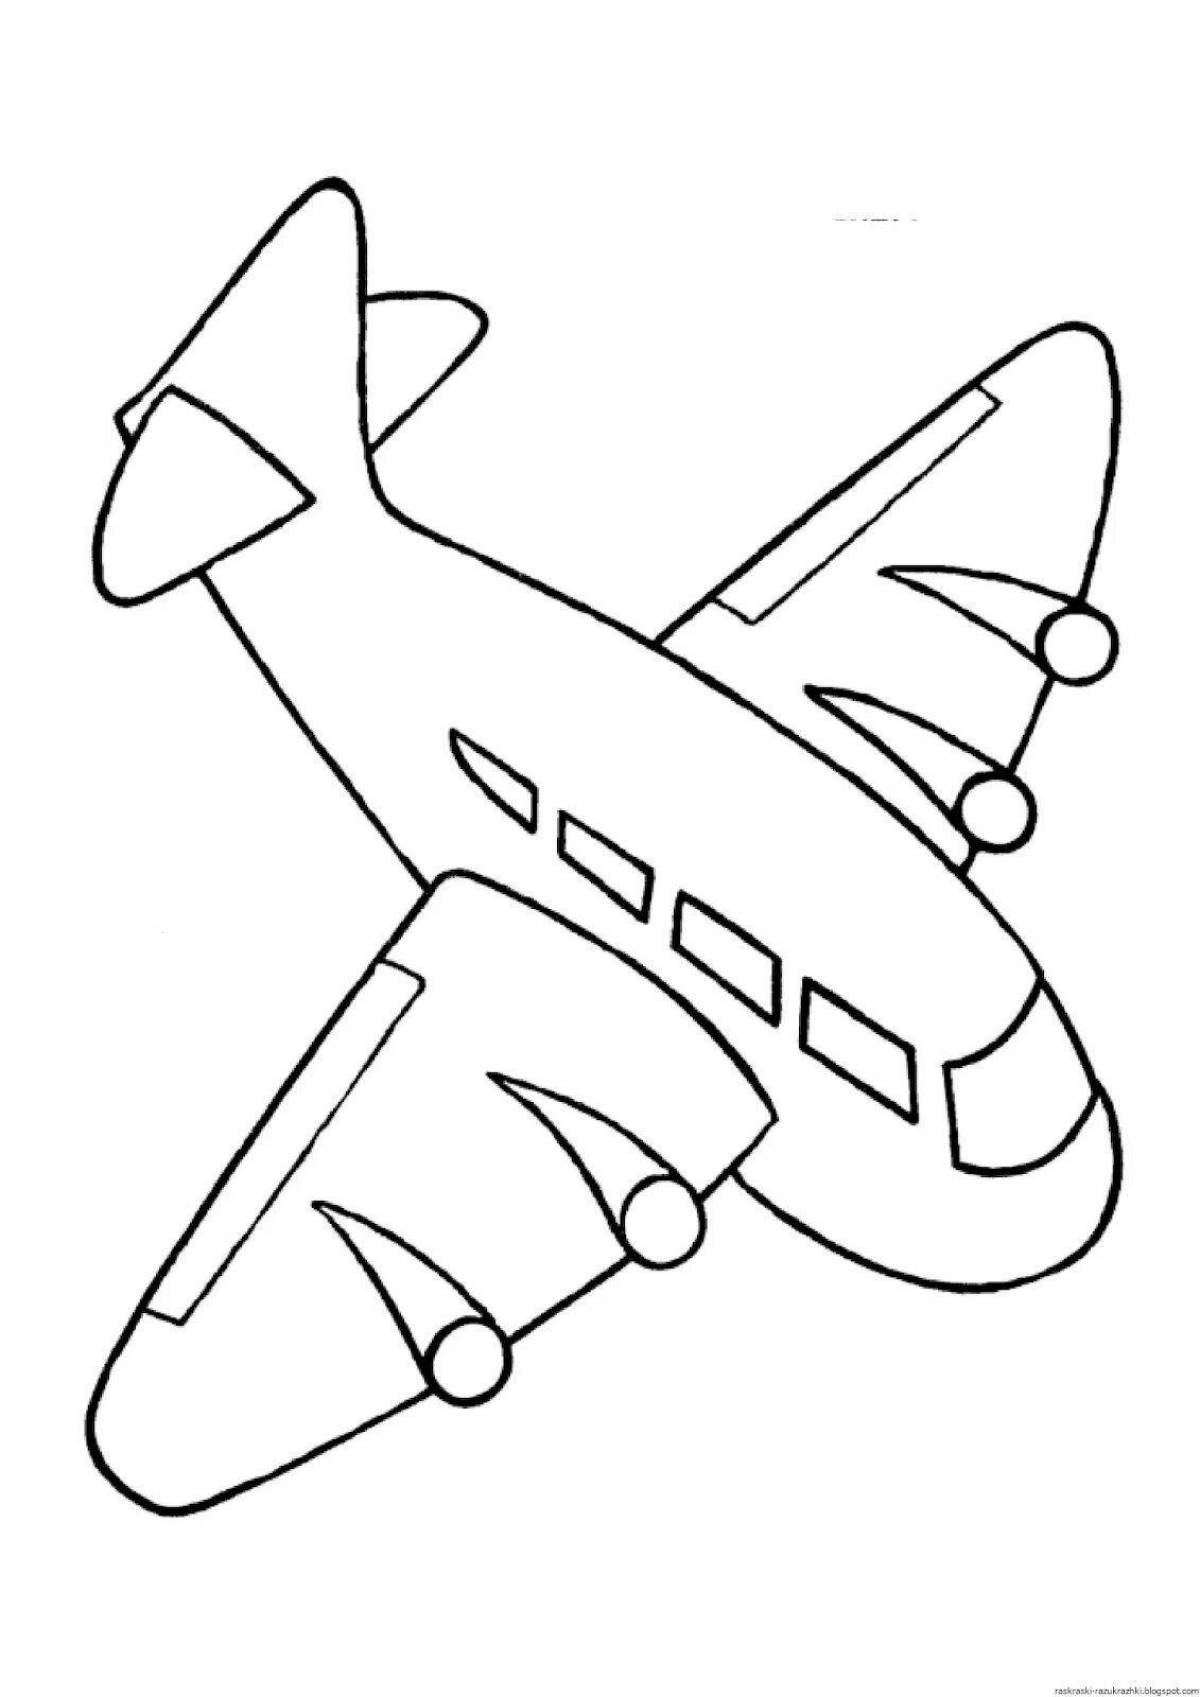 Exciting airplane drawing for kids